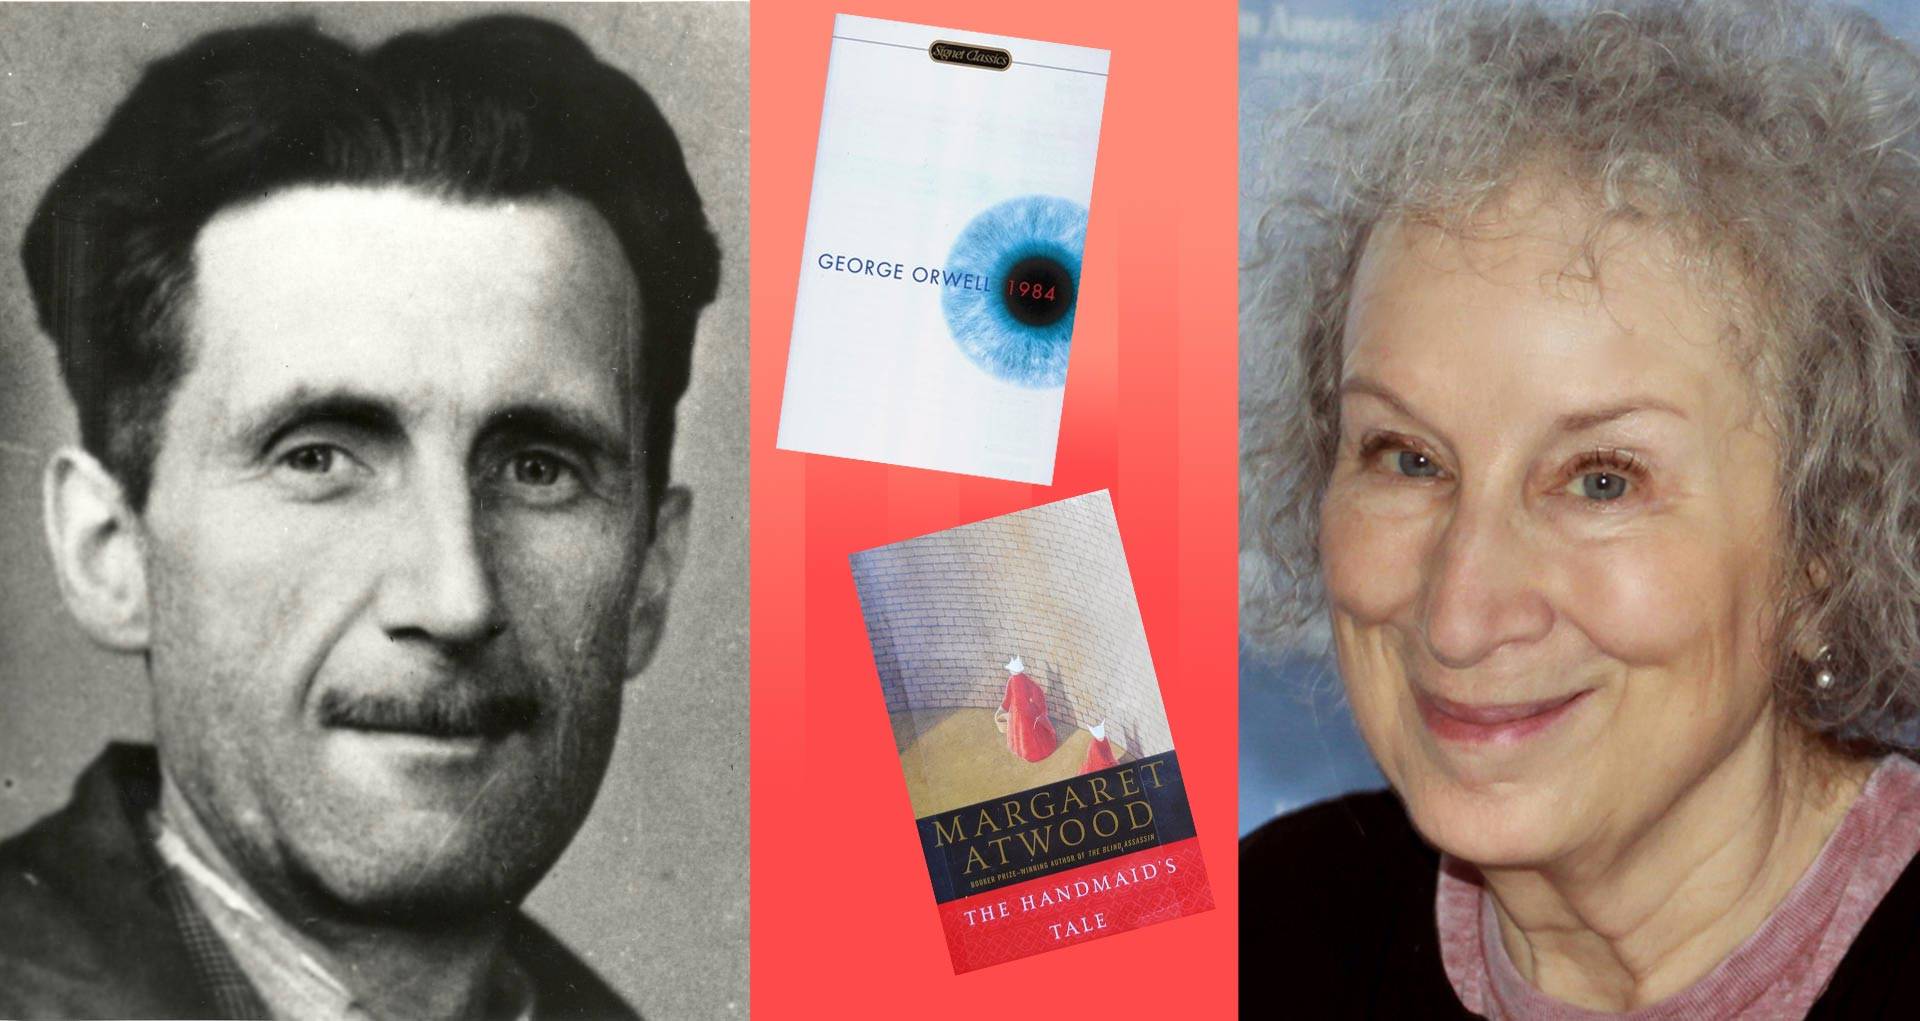 George Orwell and Margaret Atwood suddenly have top-ten bestsellers again.